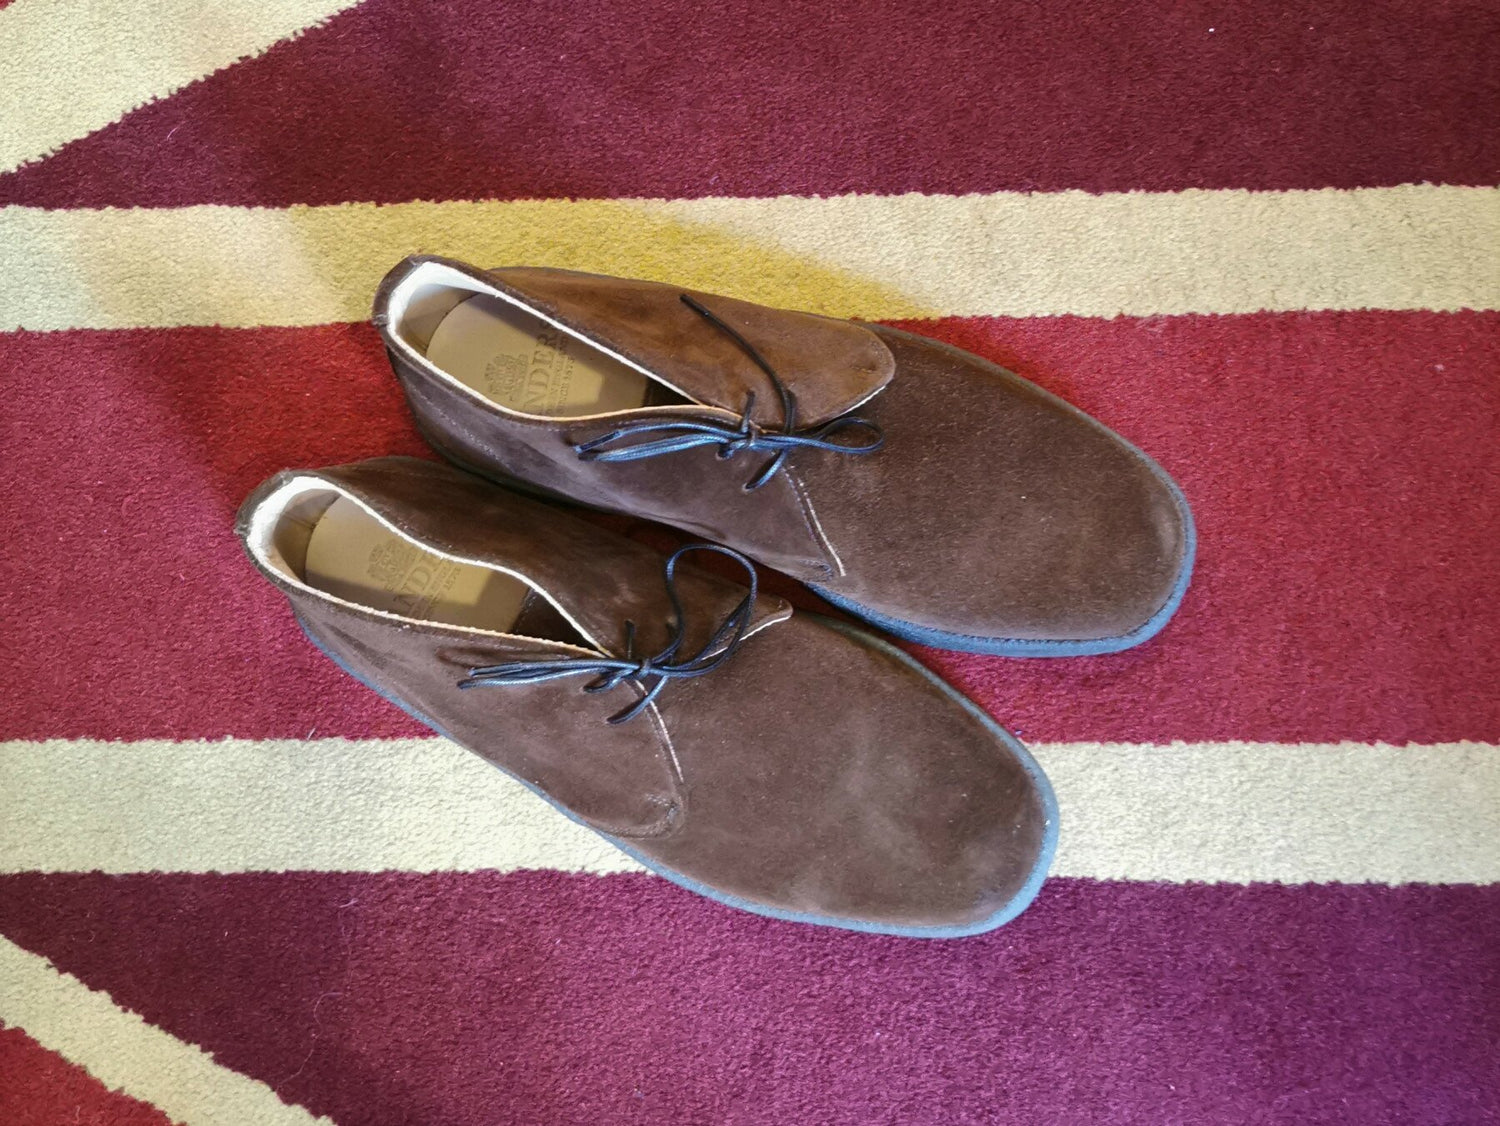 Sanders - Boots Luther Polo snuff suede